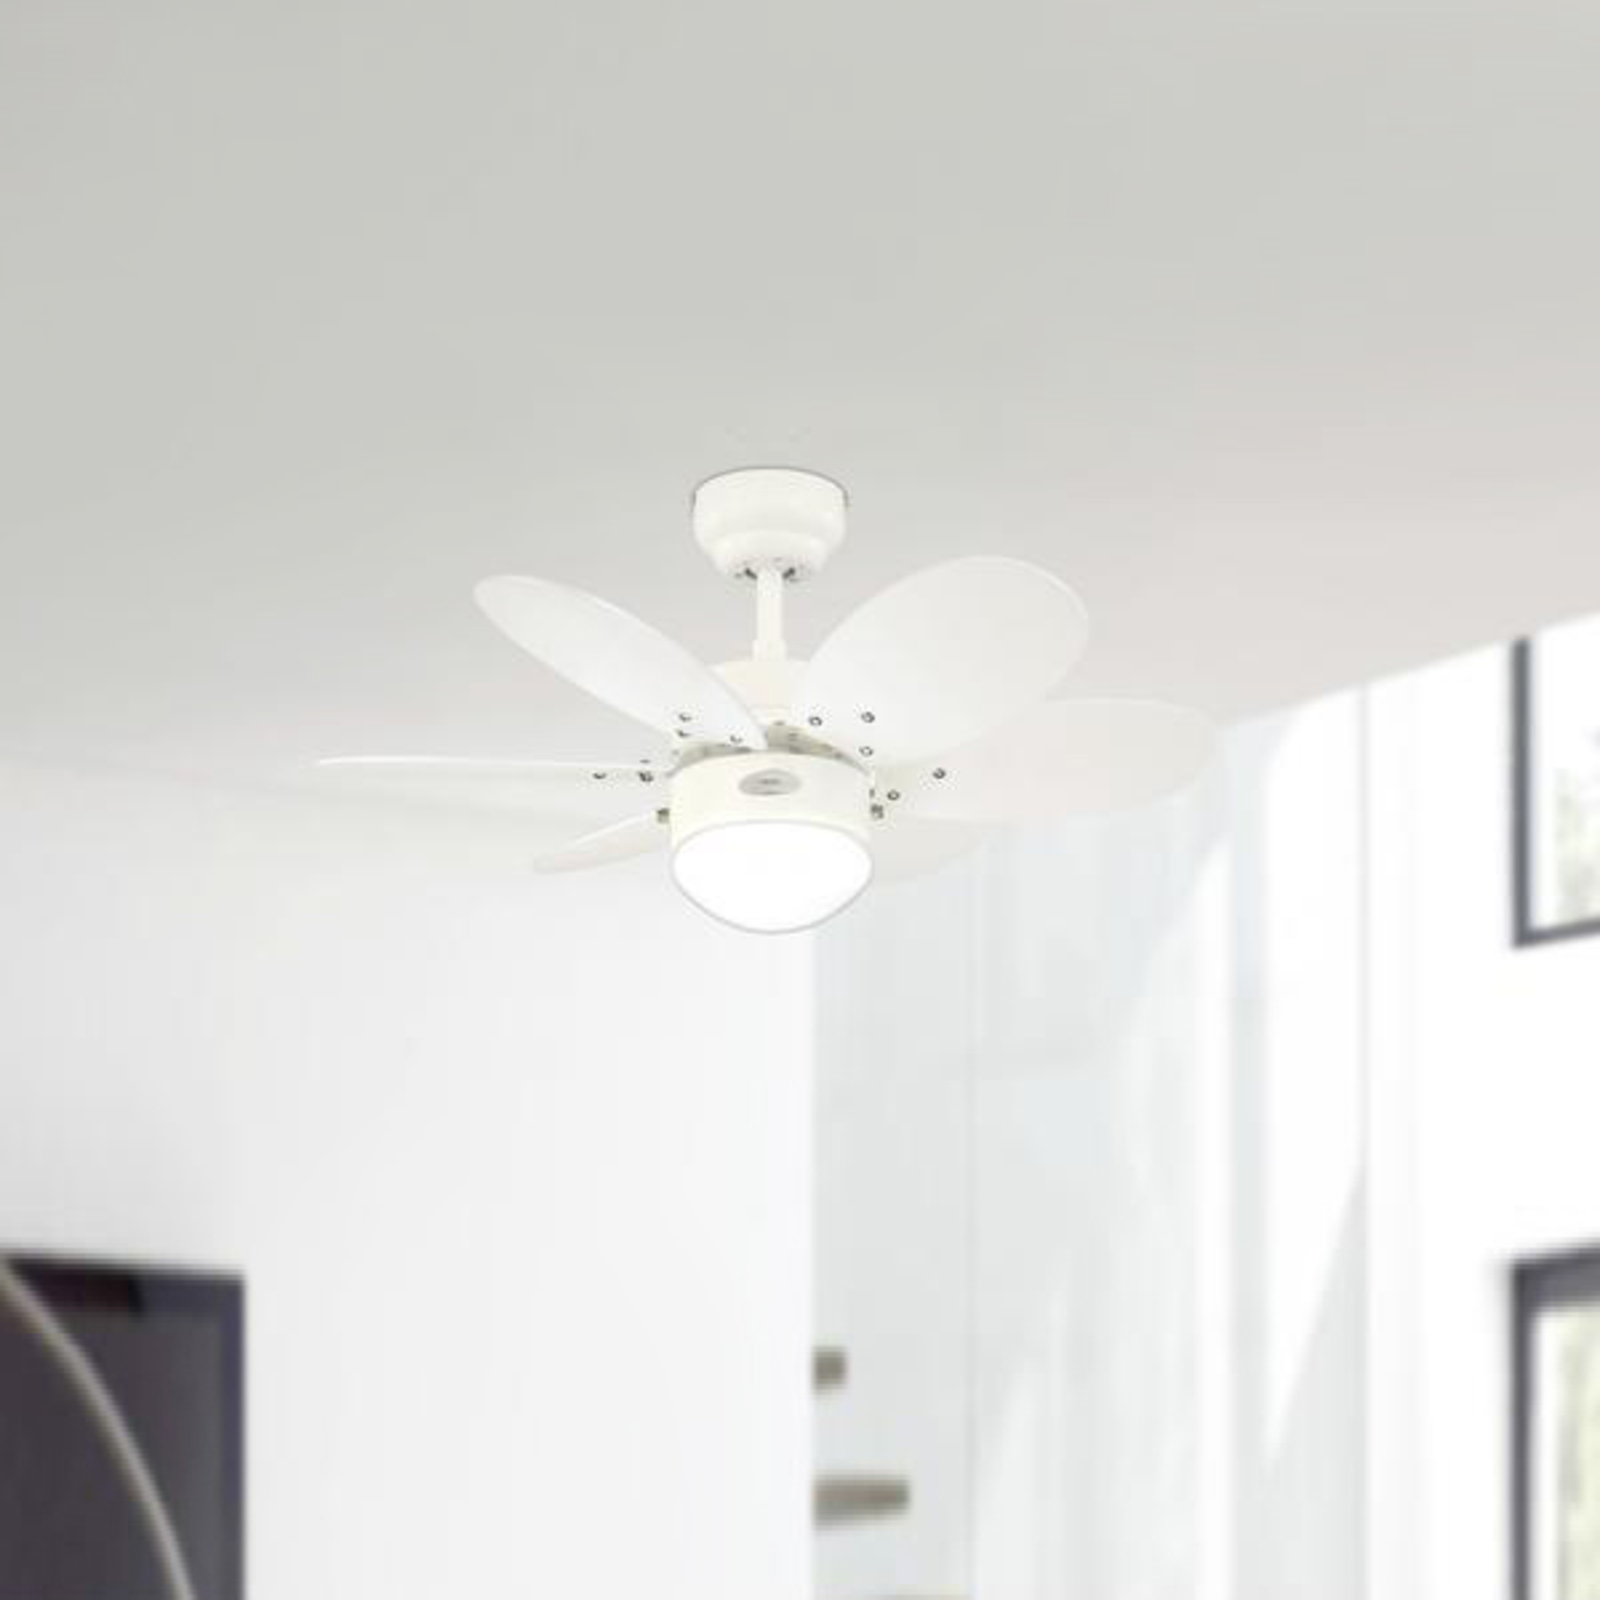 Westinghouse Turbo II fan with 2 sets of blades